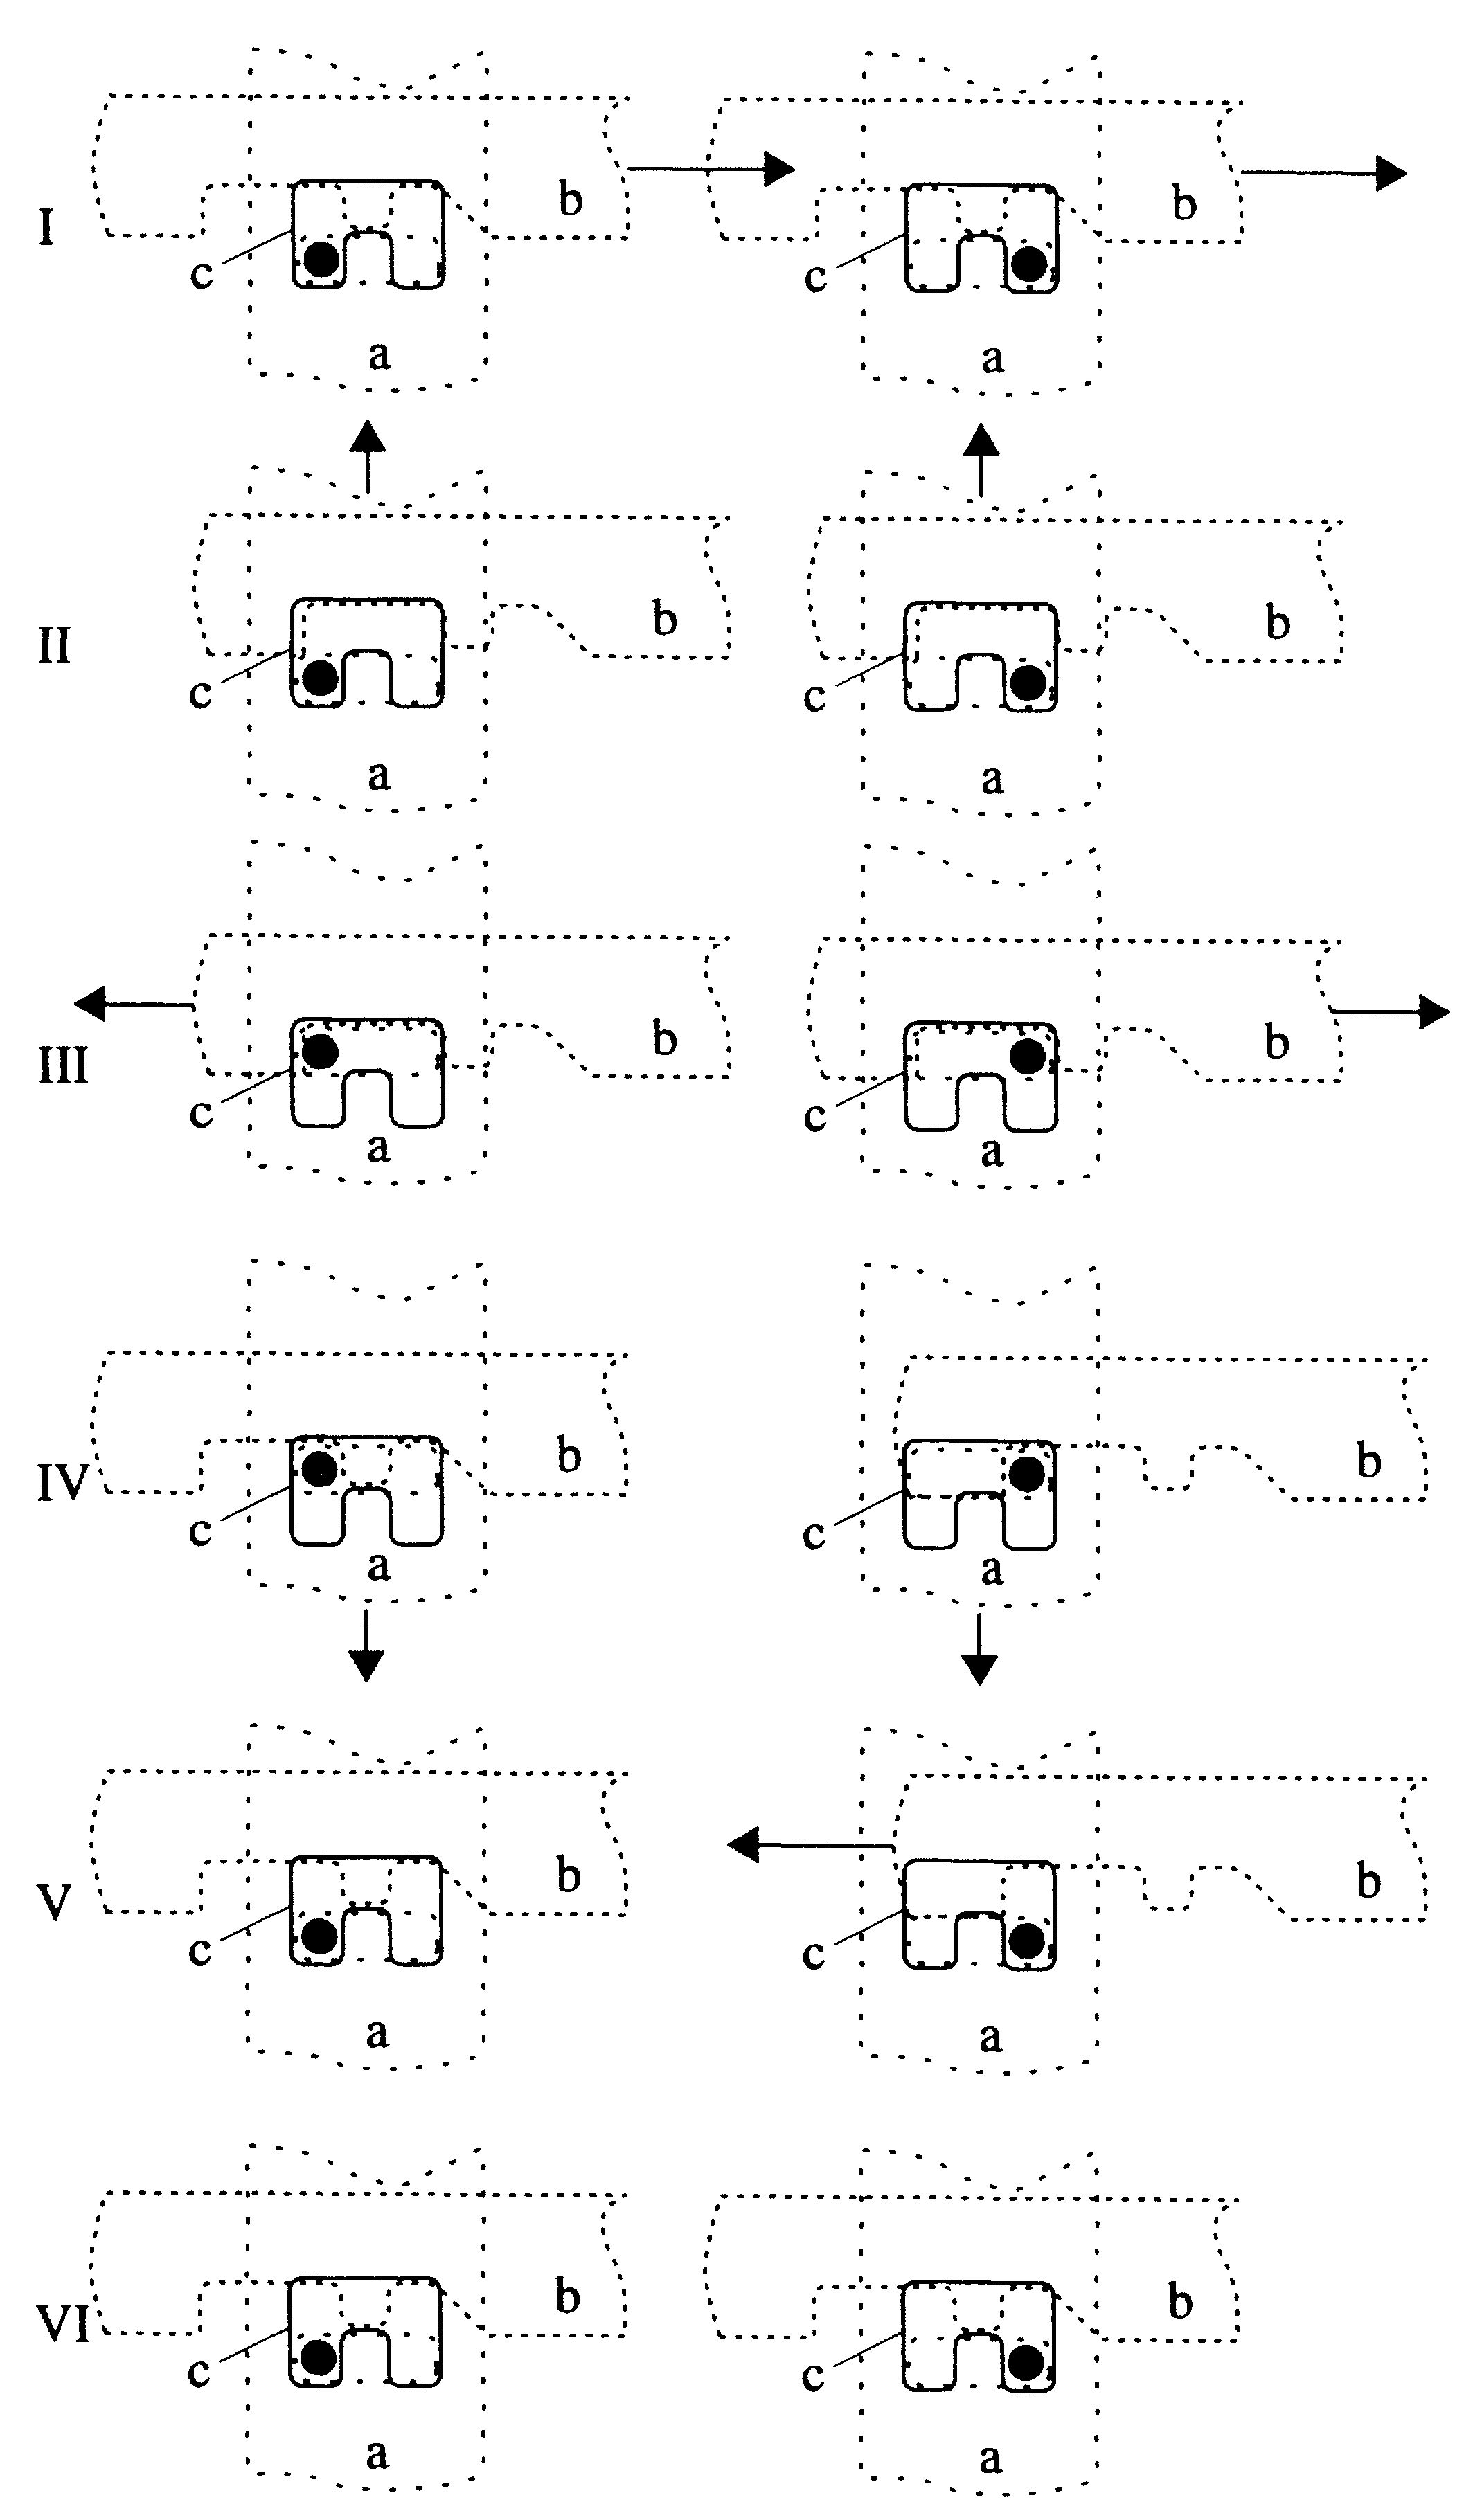 Image 6, showing all six stages of the write cycle, for both values 0 and 1